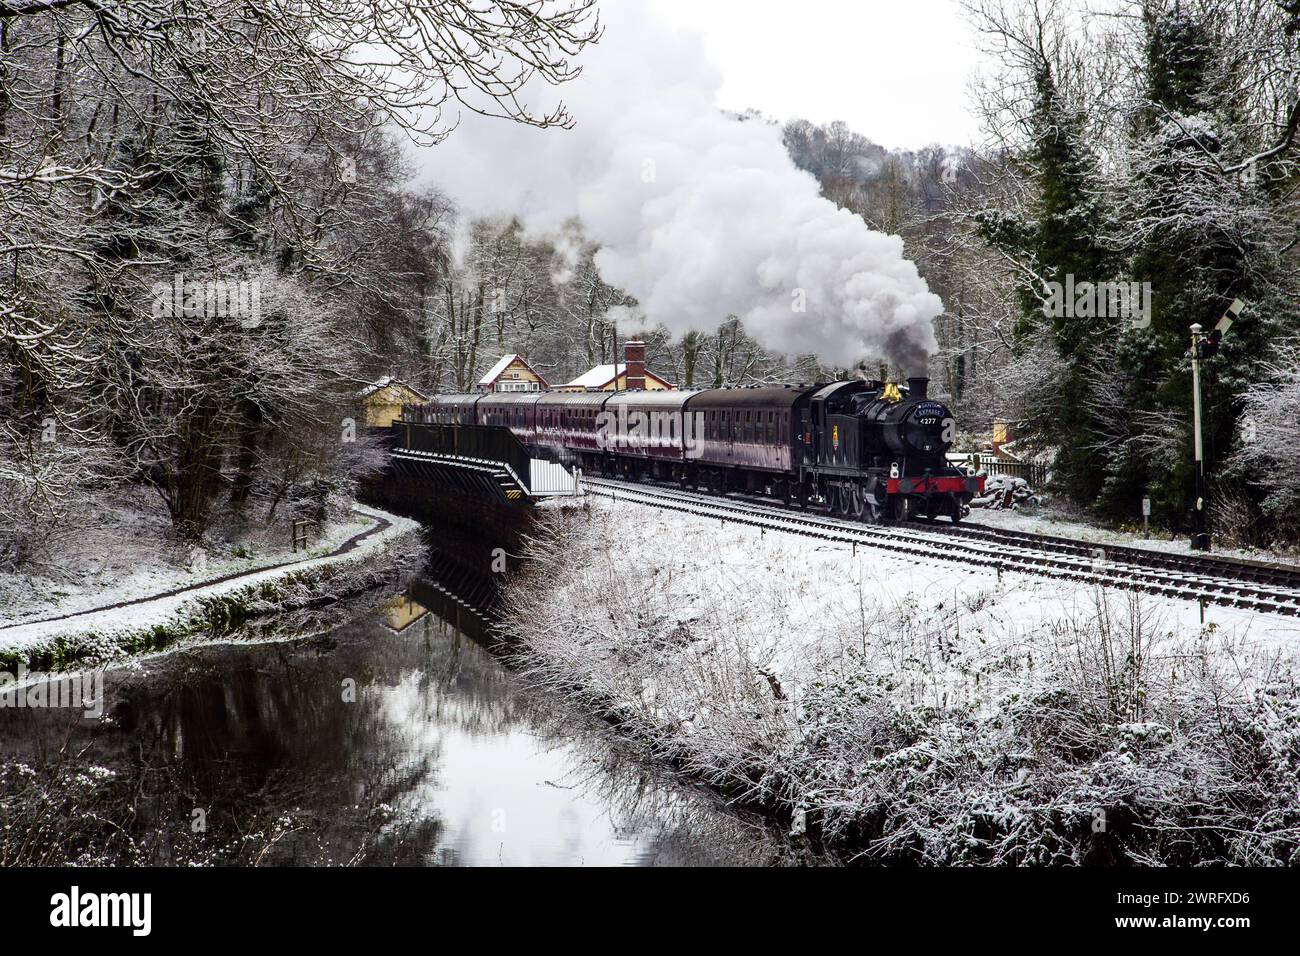 10/12/17  The Santa Express steams out of Consall station on the Churnet Valley Railway in the Staffordshire Moorlands near Leek.   All Rights Reserve Stock Photo